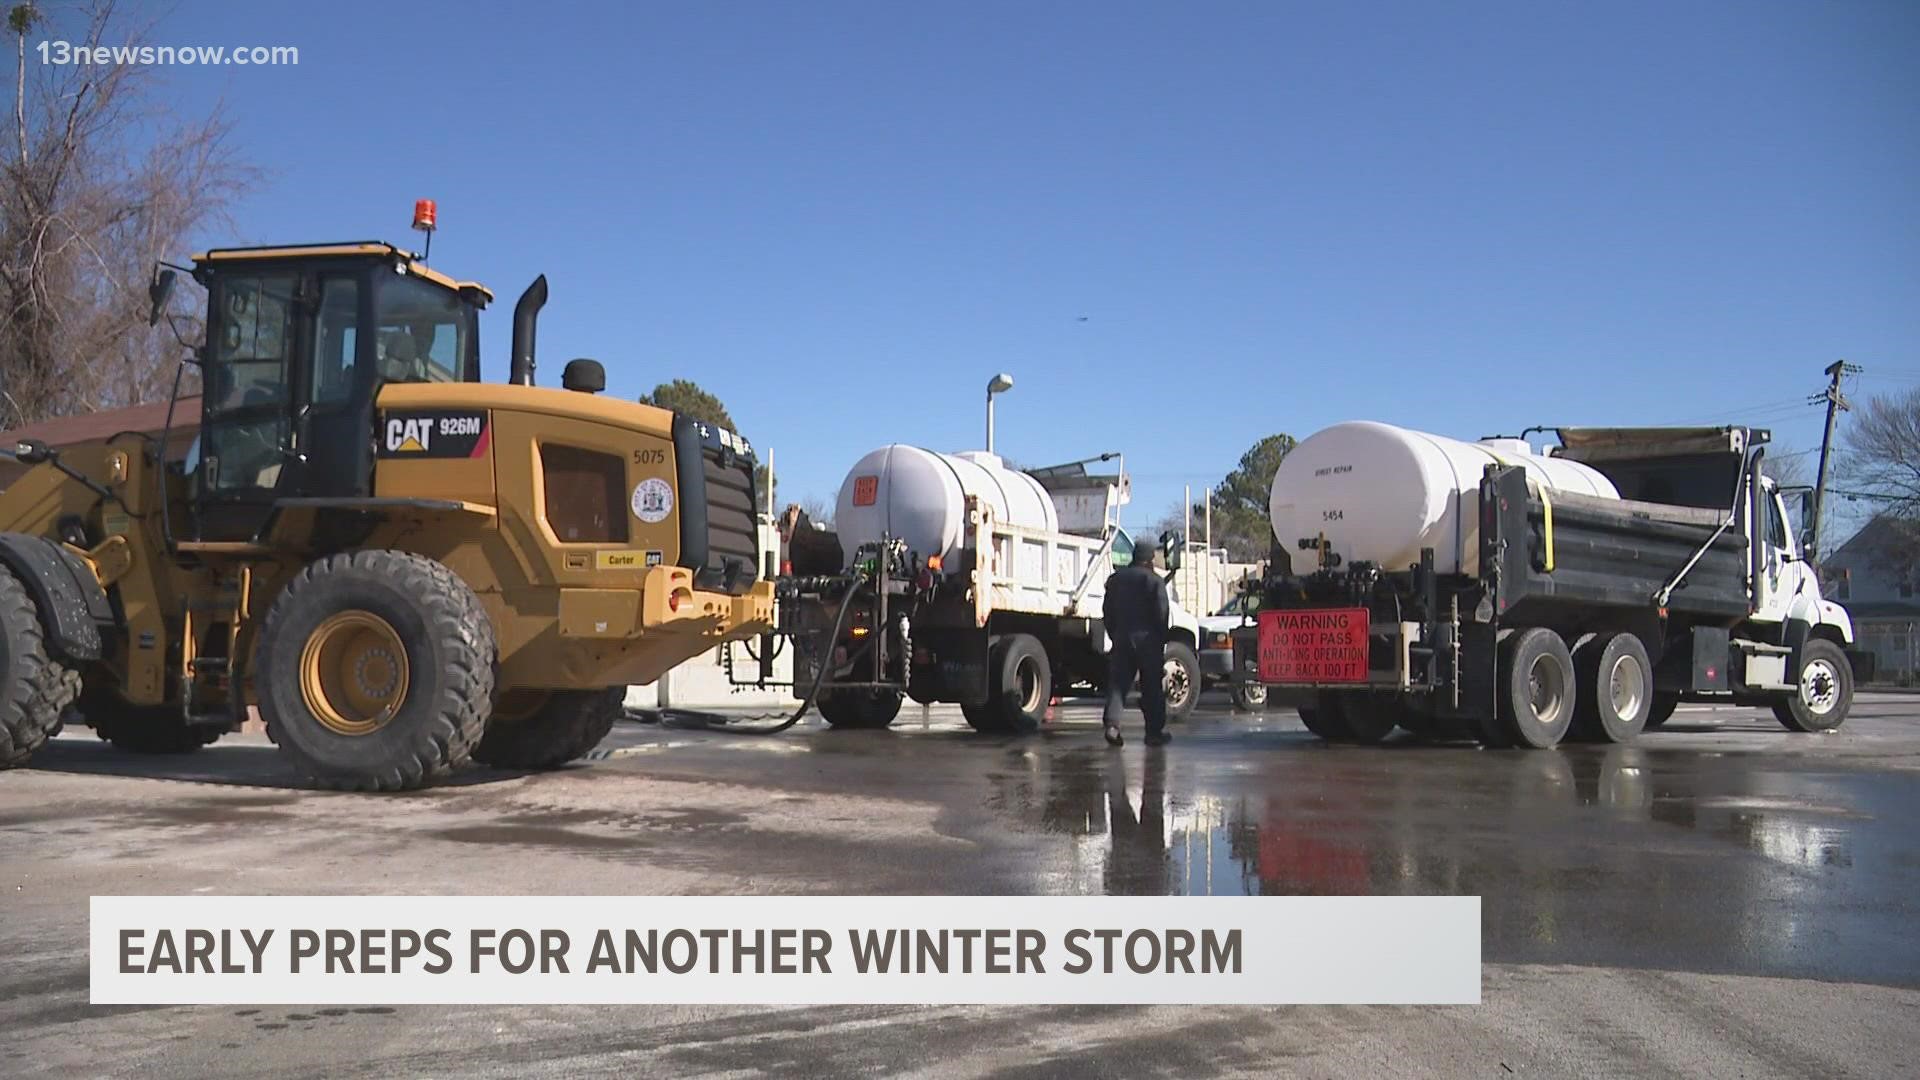 Public works crews in Hampton are busy stocking up for another round of snow.